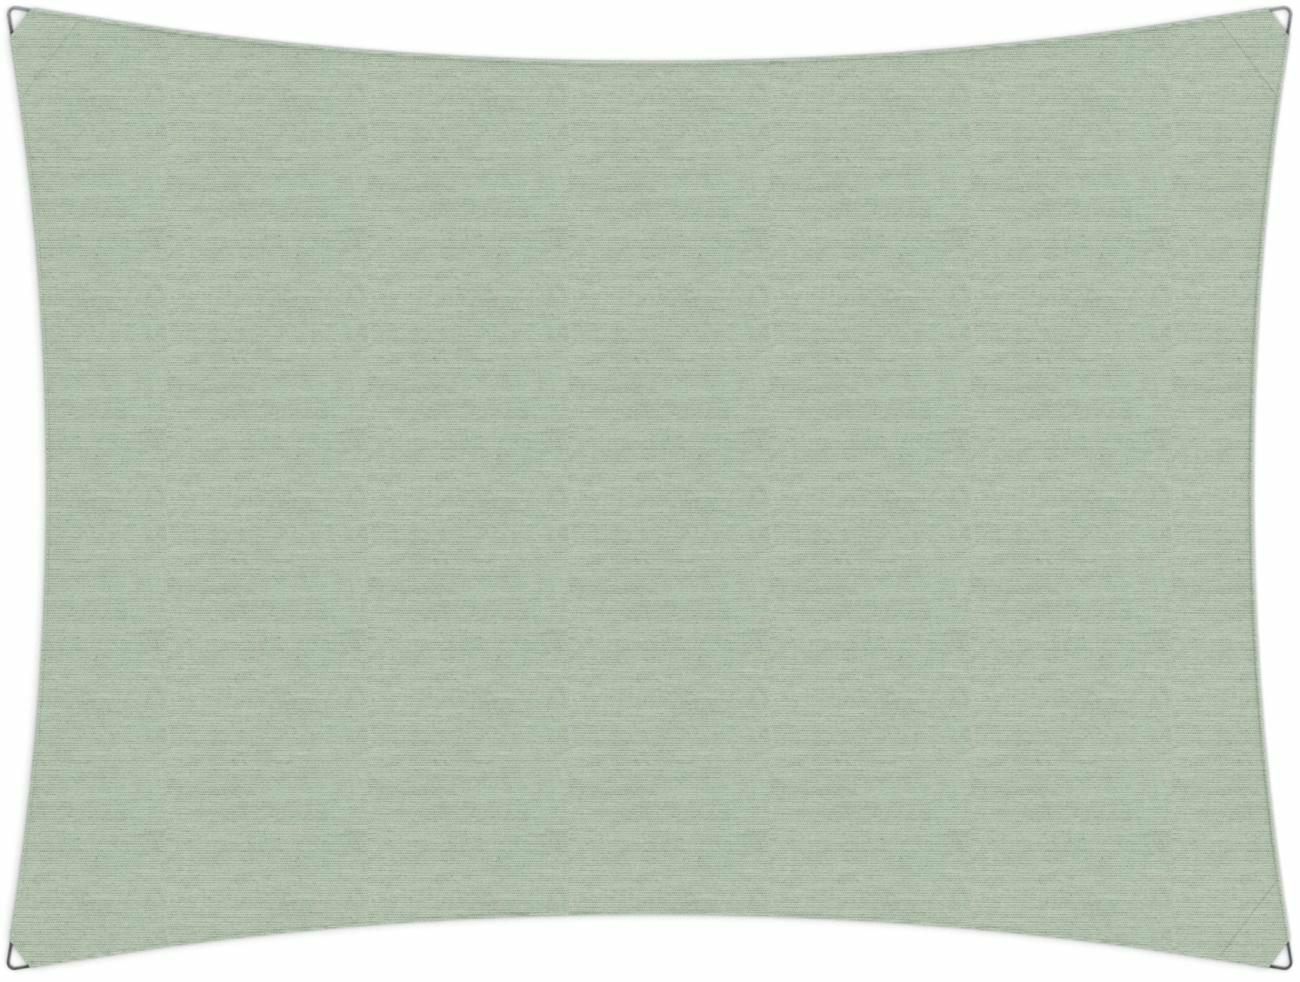 Ingenua shade sail Rectangle 5 x 3 m, for outdoor use. Colour of the fabric shade sail Mint.